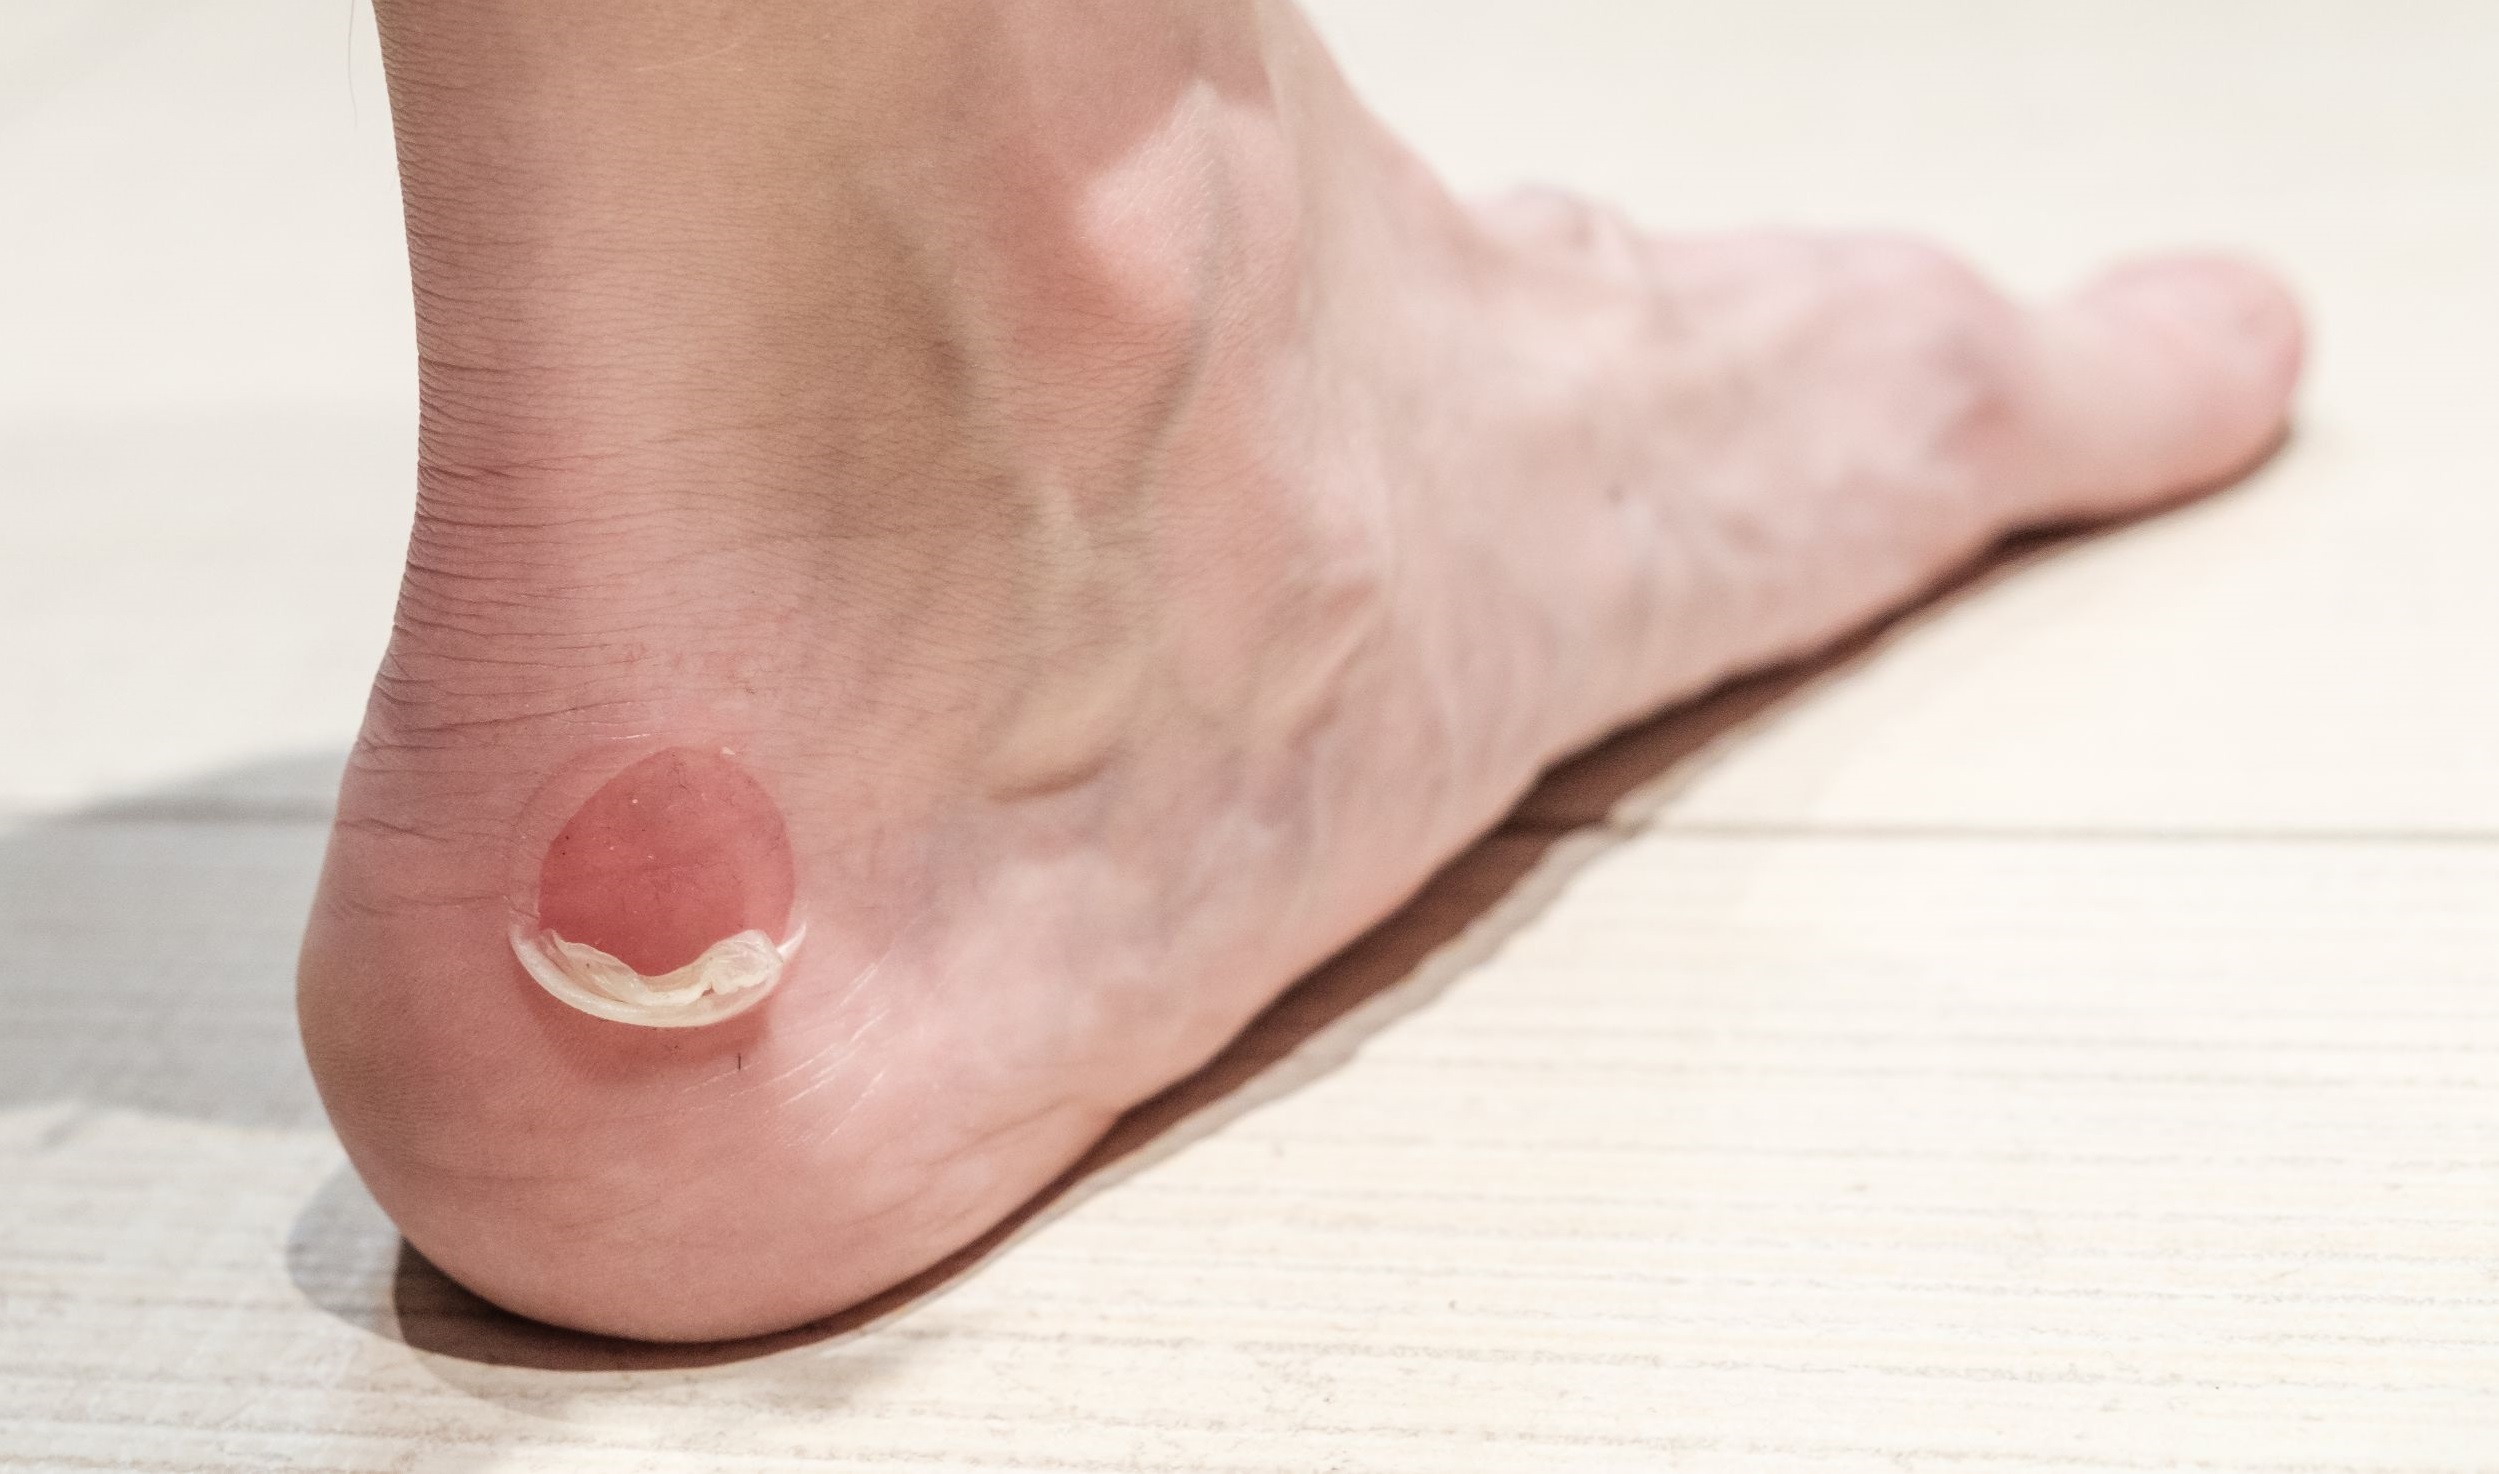 Painful And Sore Blisters On The Foot And Toe Blood Blister Treatment